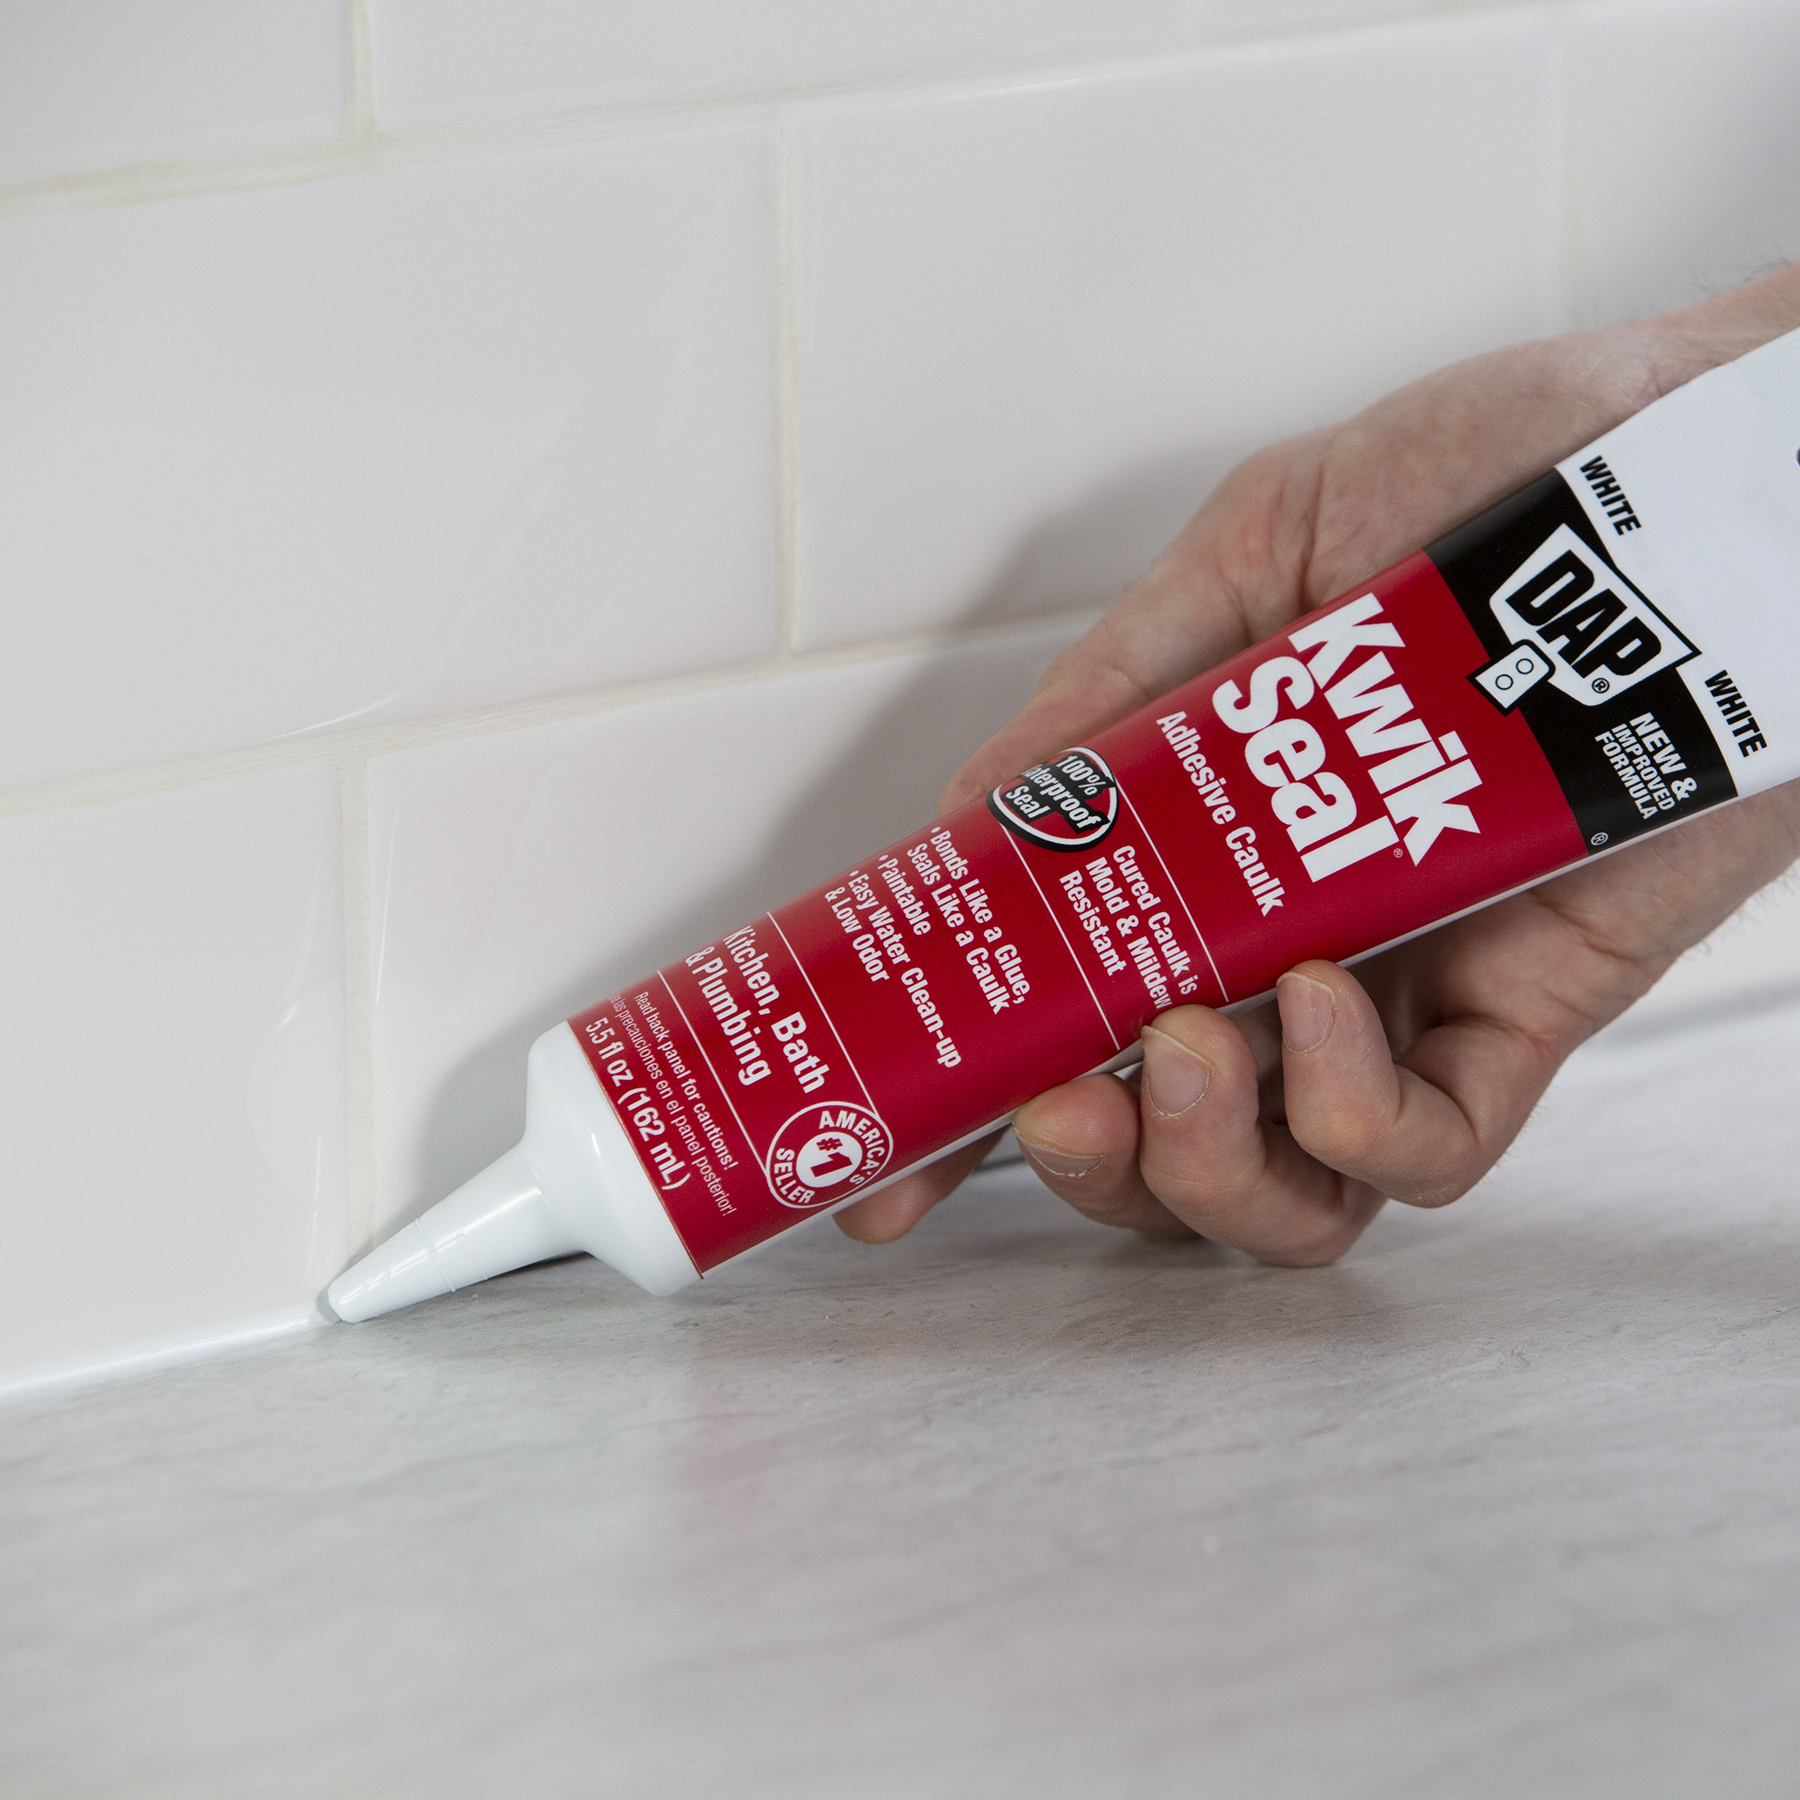 A Guide To Bathroom Adhesive/Sealant